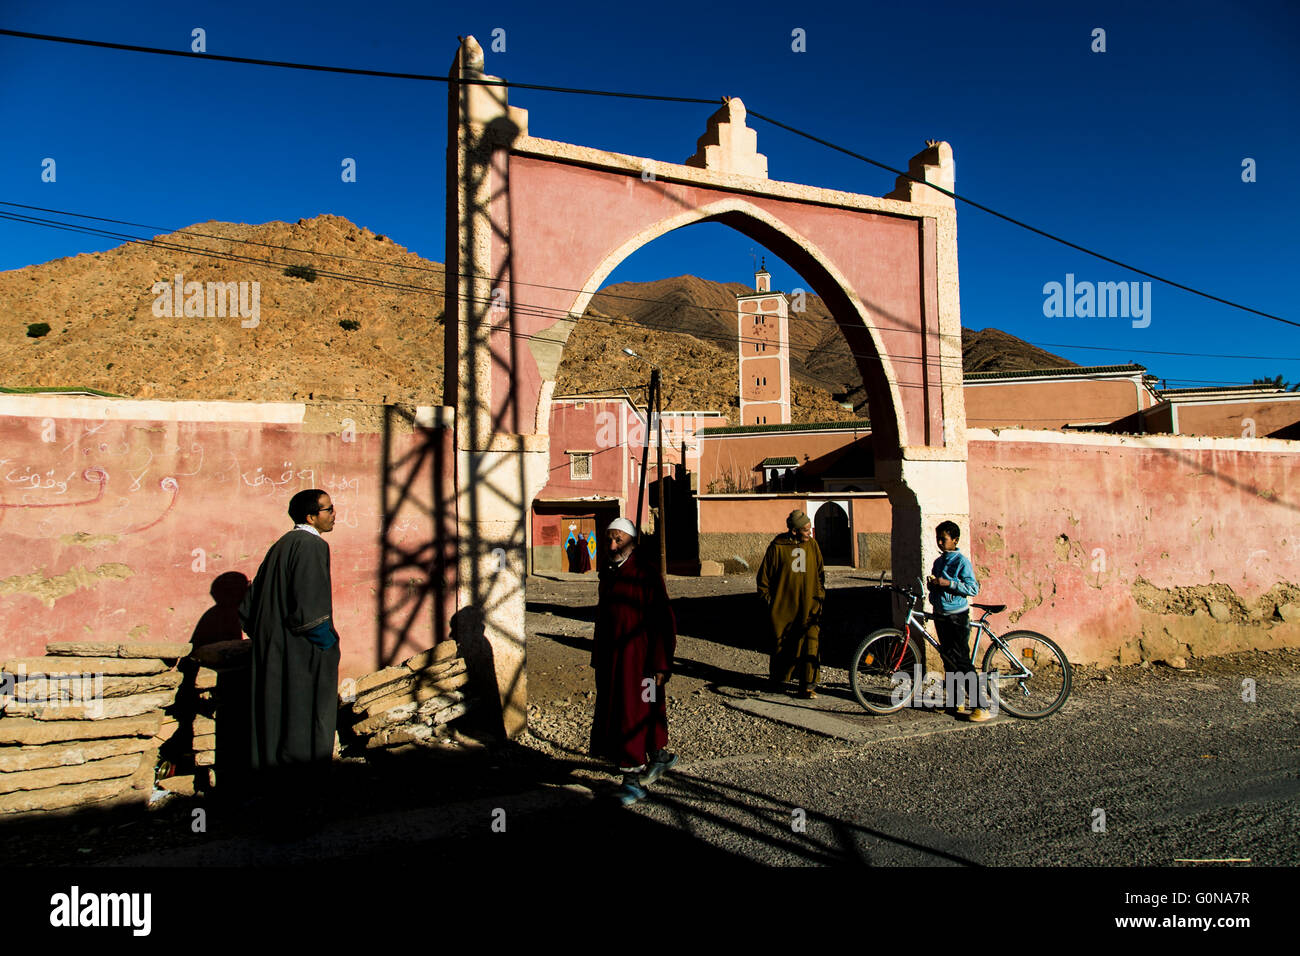 People outside a mosque in Tafrout region in the Anti-Atlas Stock Photo